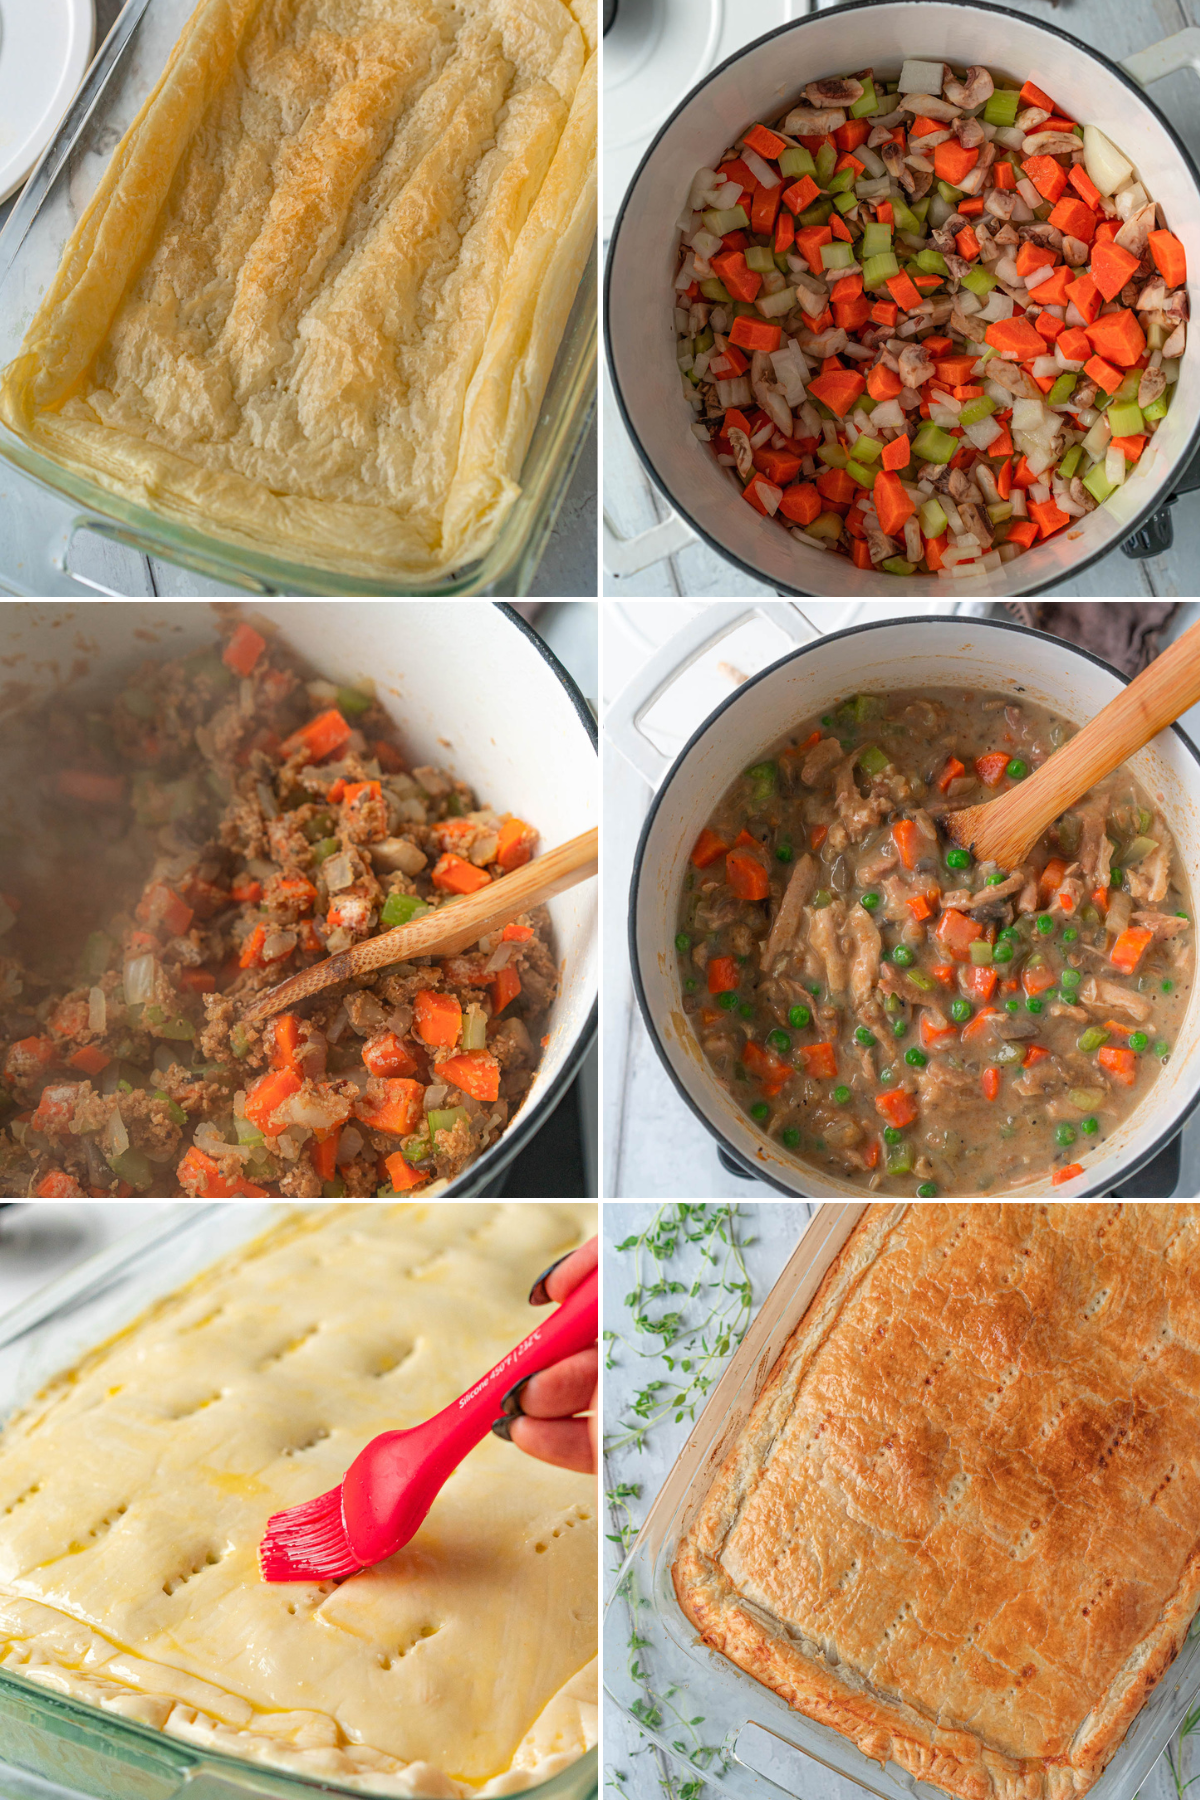 collage of images showing pot pie preparation steps; image 1 - par-baked puff pastry crust in a baking dish; image 2 - diced carrots, onions, celery, and mushrooms in a white pot; image 3 - making a roux in a pot with sautéed vegetables and flour; image 4 - finished pot pie filling in a pot; image 5 - brushing raw top pie crust with egg wash; image 6 - finished pot pie in a baking dish